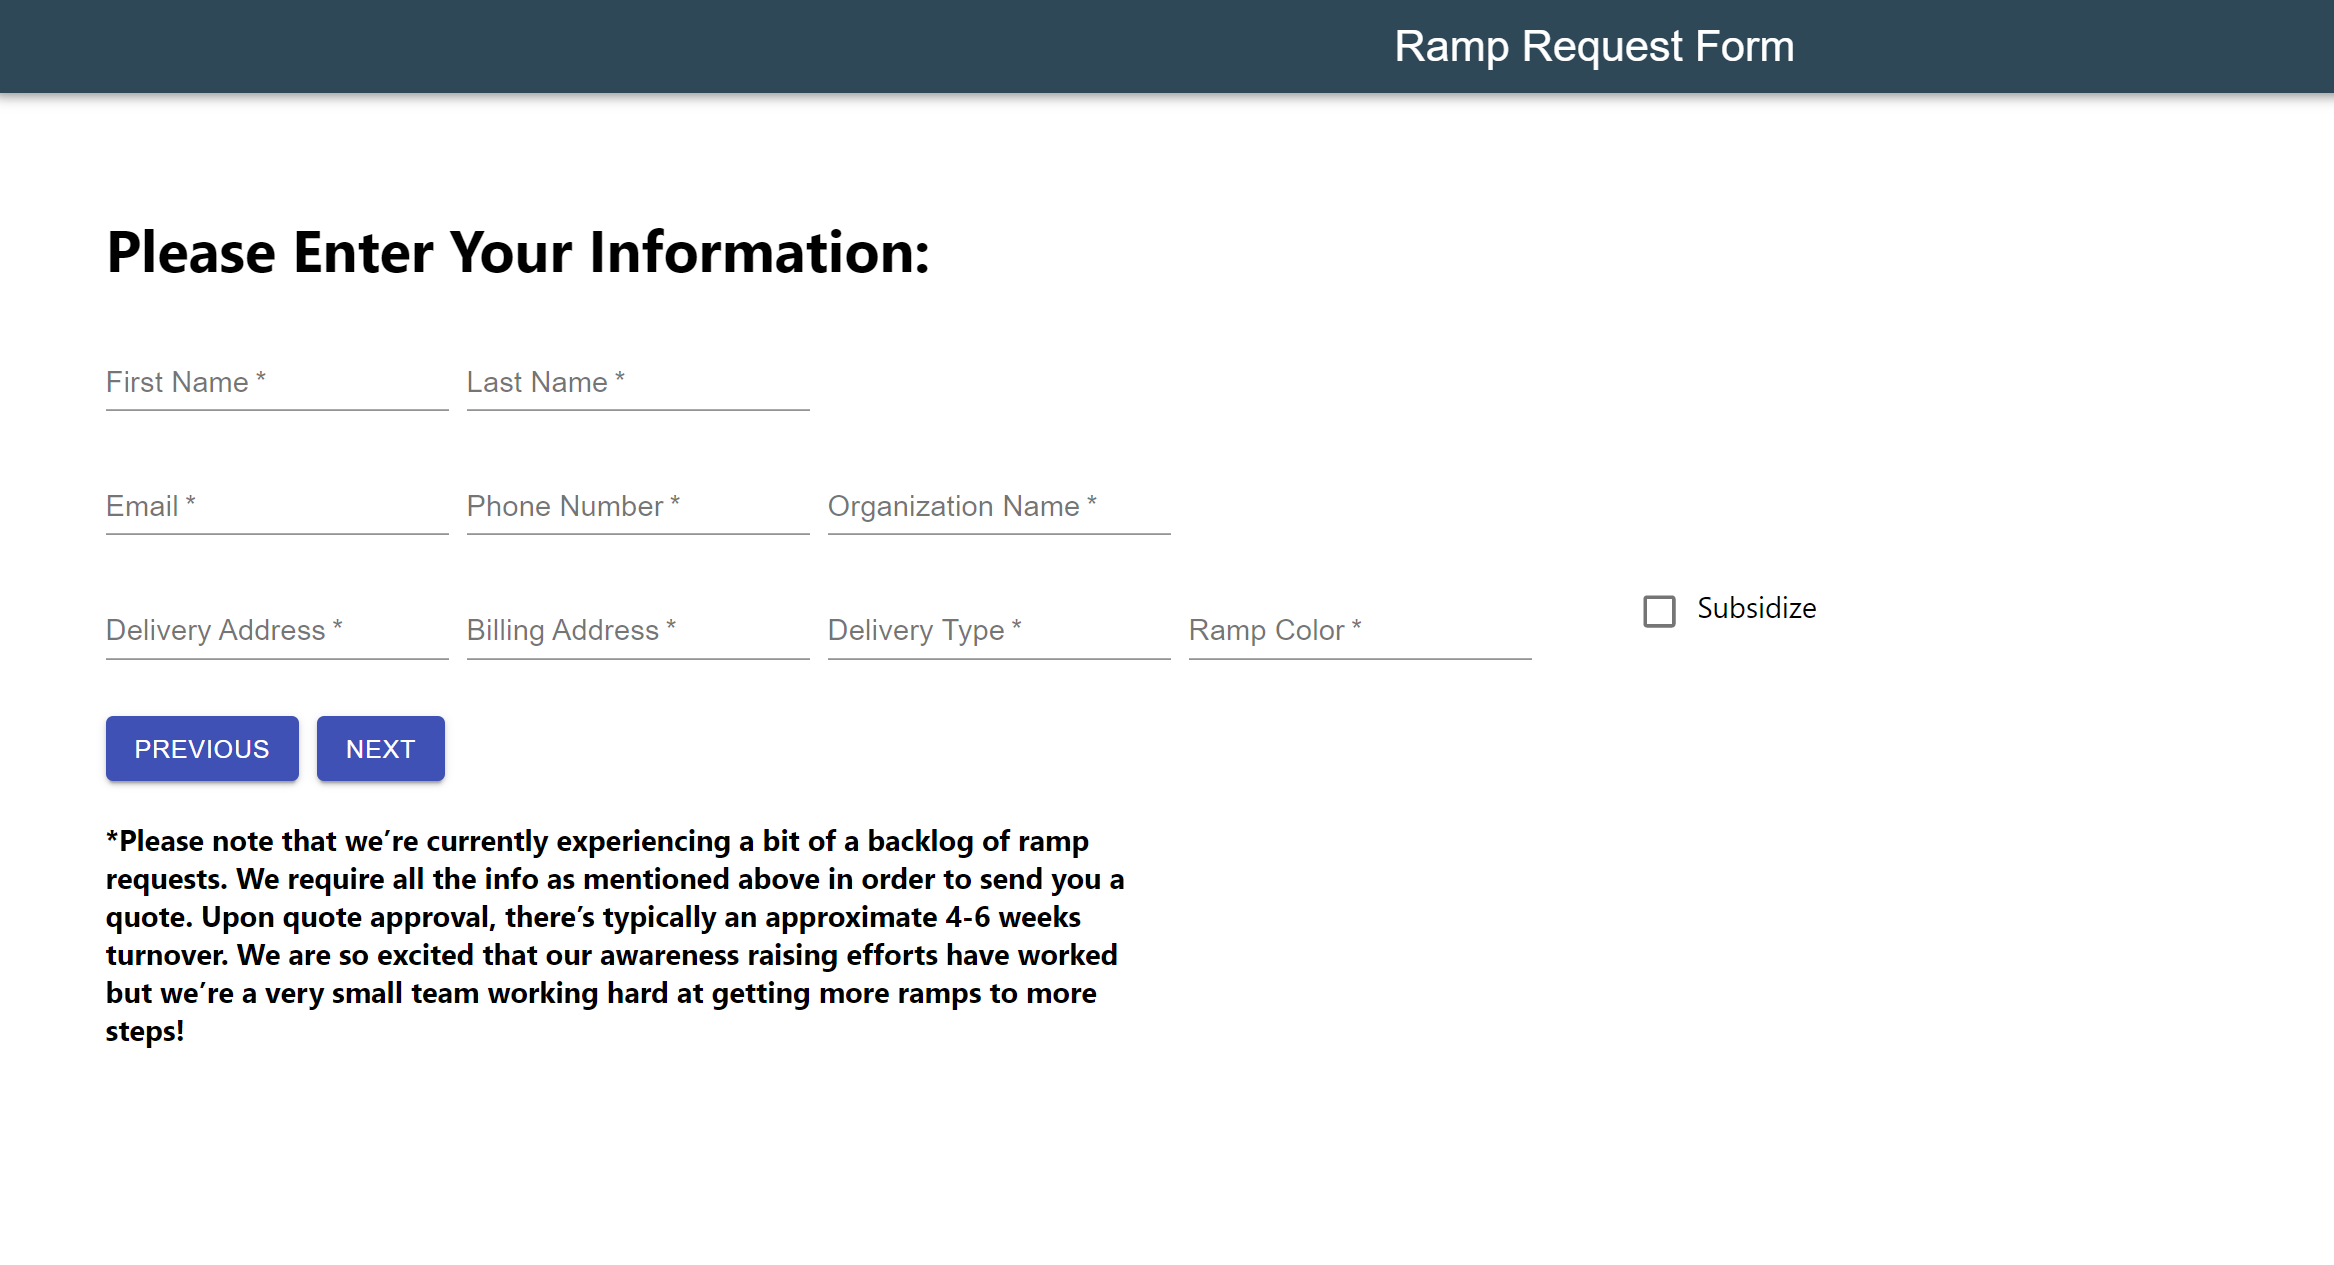 Ramp Request Form